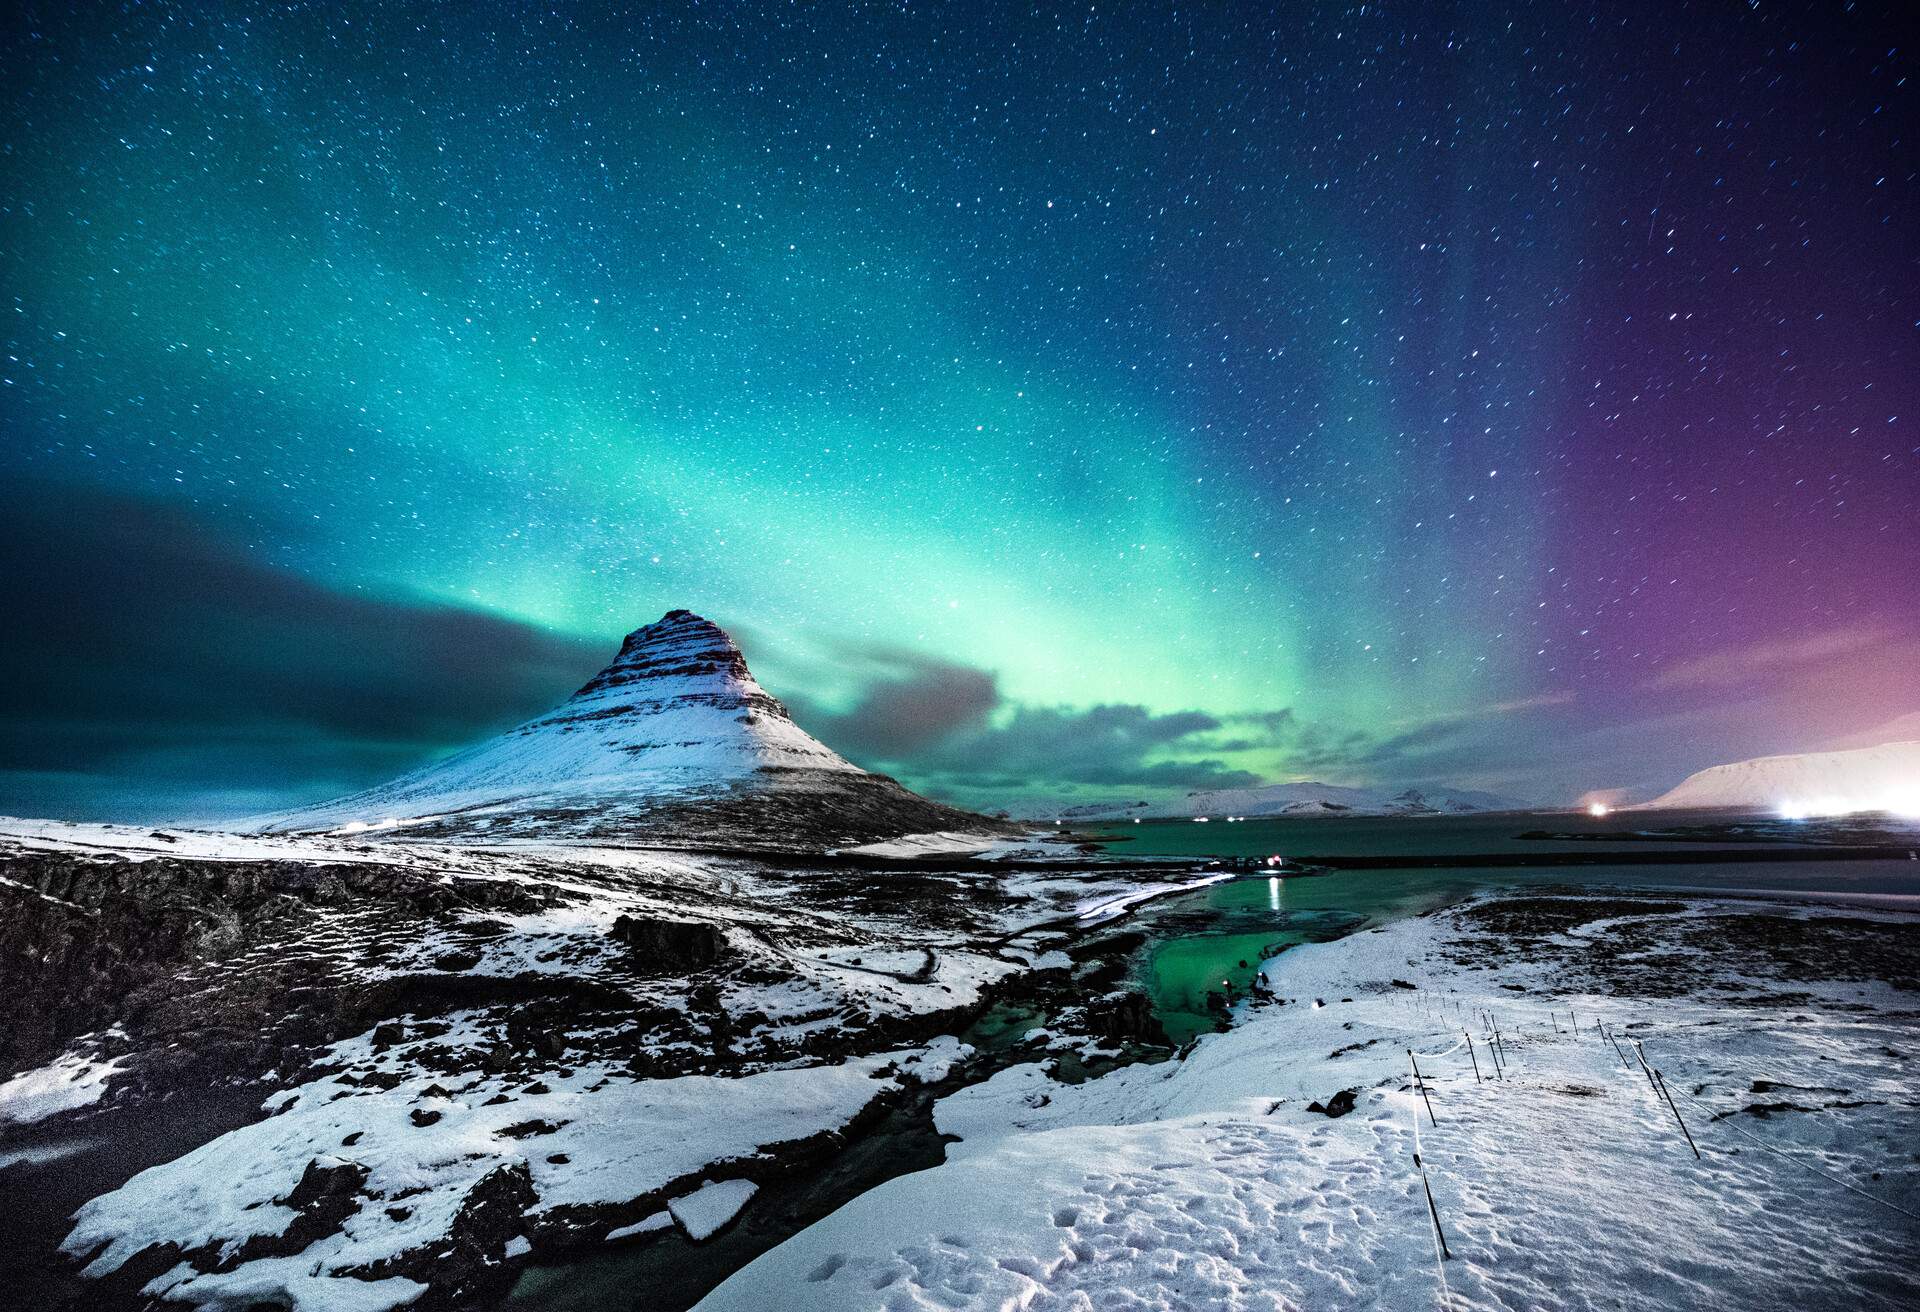 Exquisite Northern Lights in the starry night sky above the snow-covered land. 